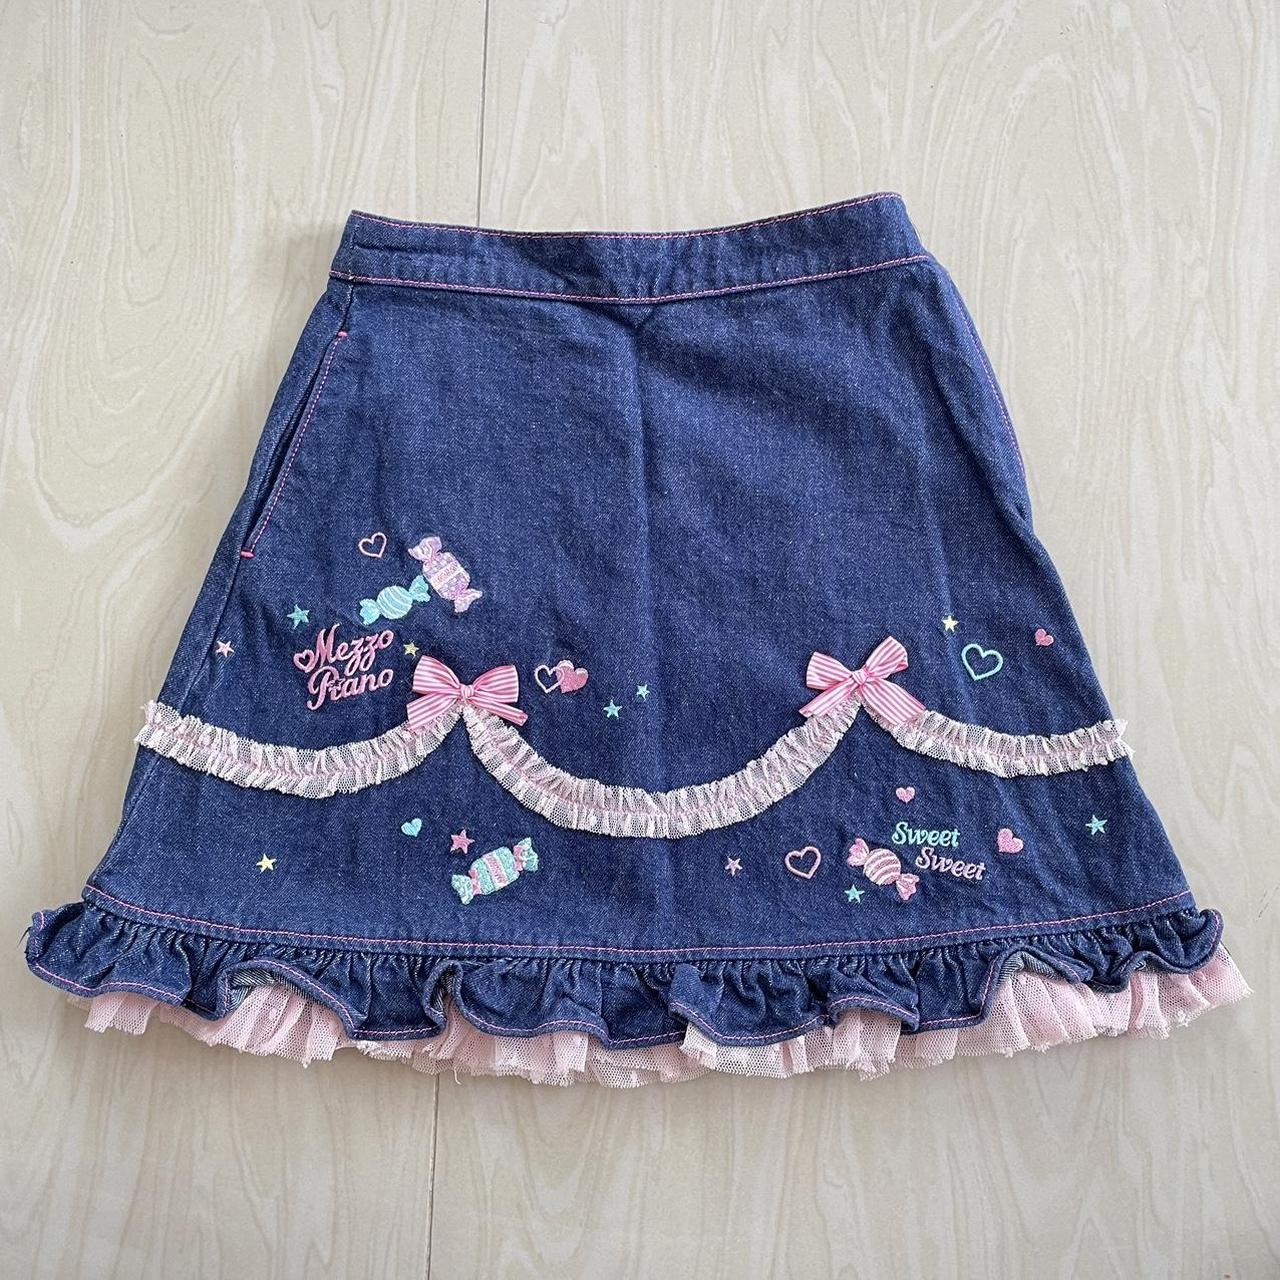 Mezzo piano jeans skirt decorated with a pink... - Depop